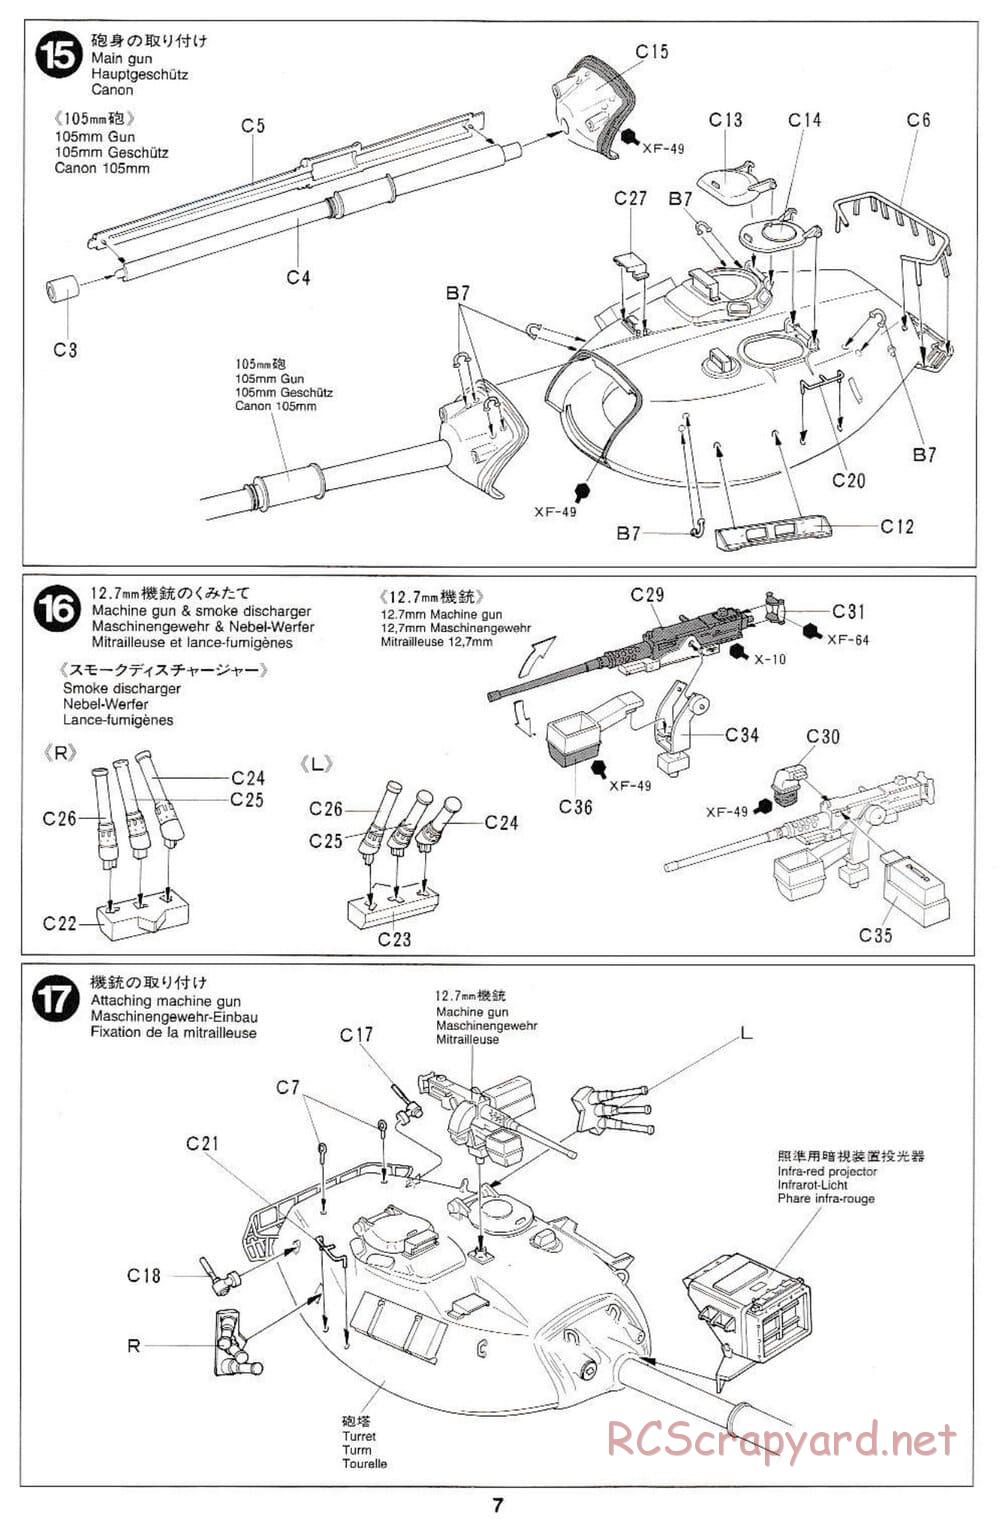 Tamiya - J.G.S.D.F. Type 74 - 1/35 Scale Chassis - Manual - Page 7